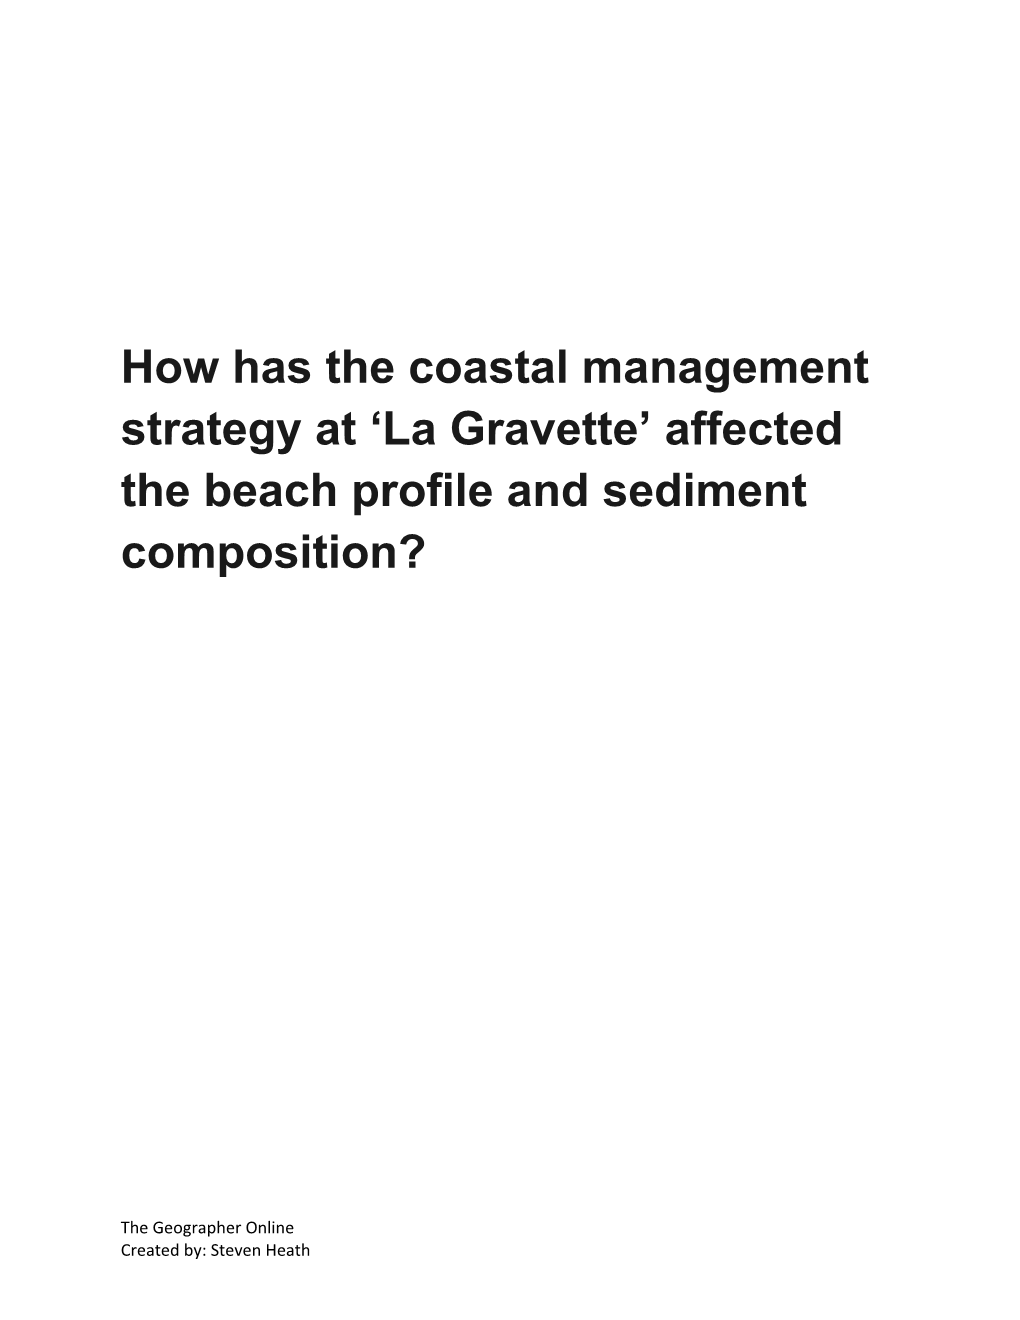 How Has the Coastal Management Strategy at La Gravette Affected the Beach Profile And